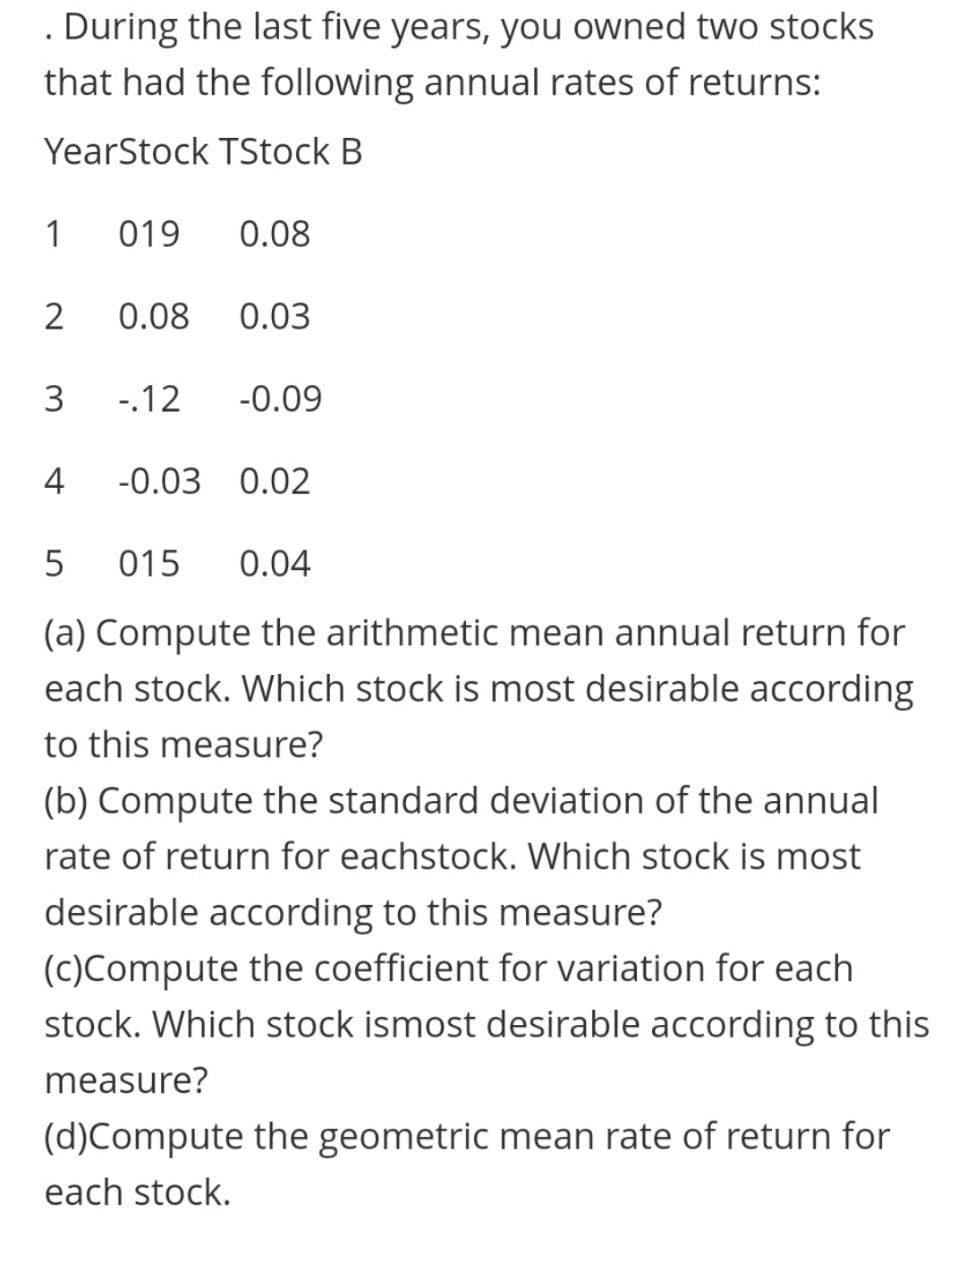 . During the last five years, you owned two stocks
that had the following annual rates of returns:
YearStock TStock B
1
019
0.08
2
0.08
0.03
-.12
-0.09
4
-0.03 0.02
015
0.04
(a) Compute the arithmetic mean annual return for
each stock. Which stock is most desirable according
to this measure?
(b) Compute the standard deviation of the annual
rate of return for eachstock. Which stock is most
desirable according to this measure?
(c)Compute the coefficient for variation for each
stock. Which stock ismost desirable according to this
measure?
(d)Compute the geometric mean rate of return for
each stock.
